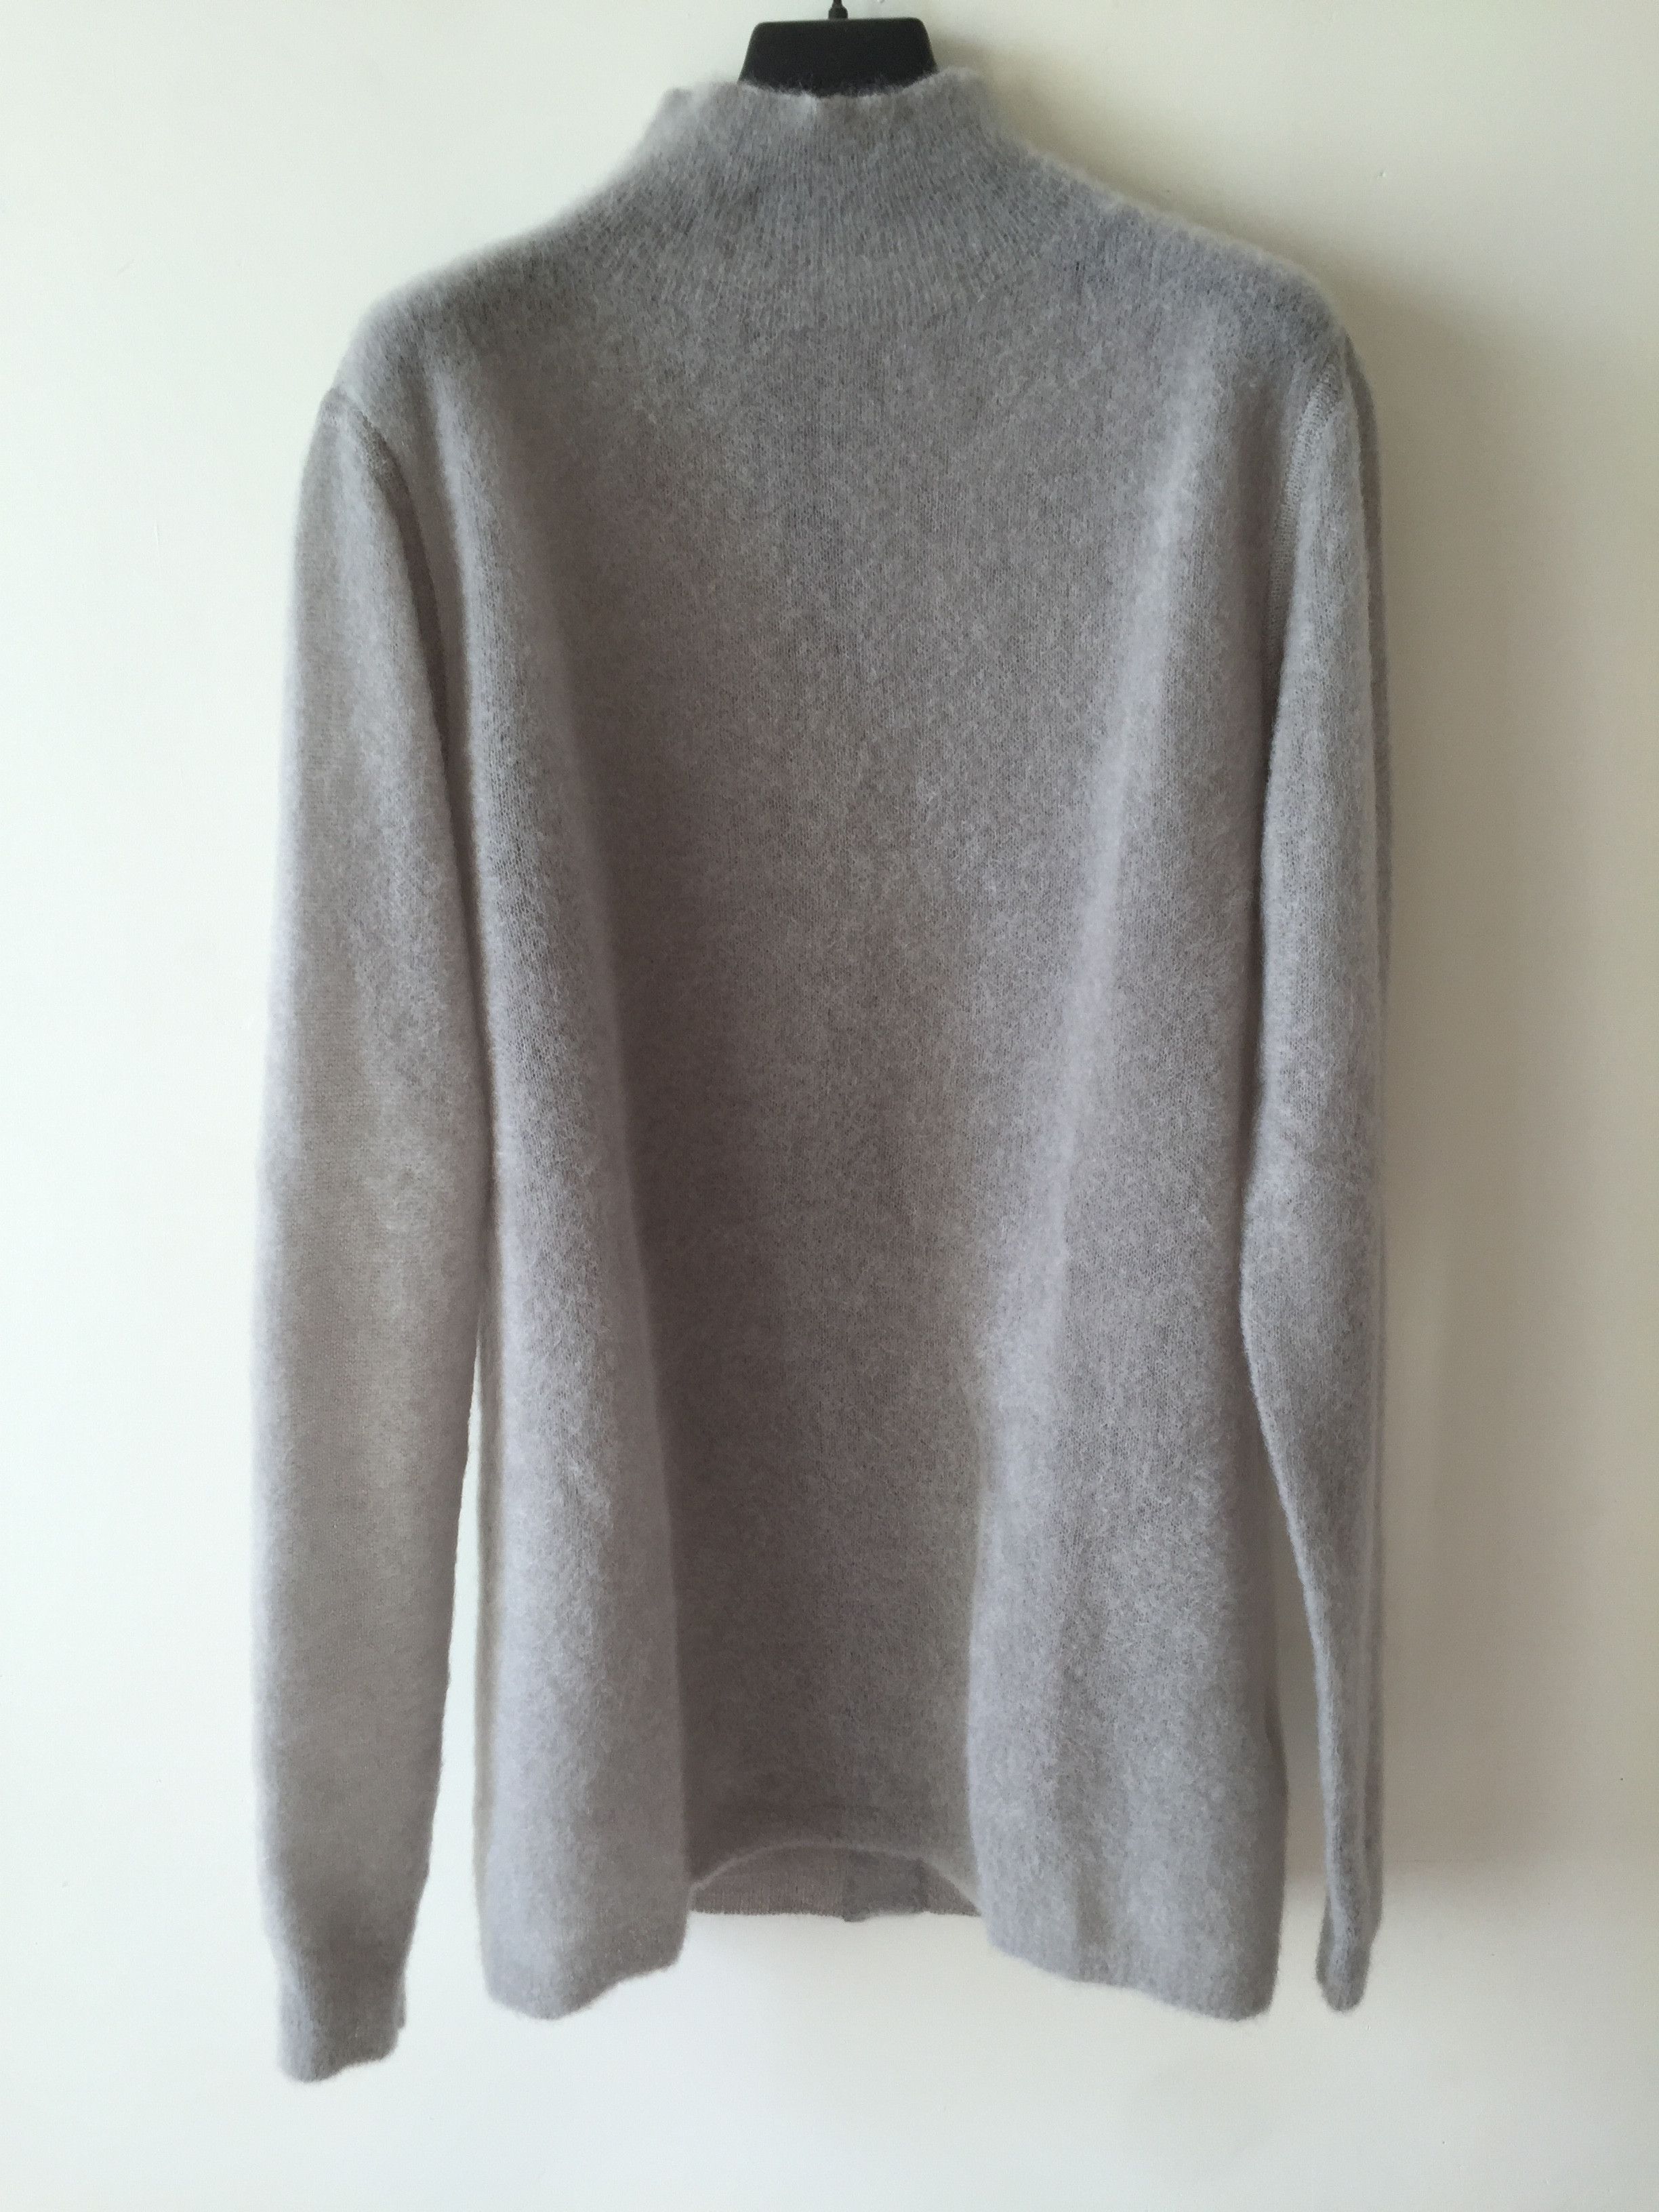 Rick Owens FW15 SPHINX MOHAIR SWEATER Size US M / EU 48-50 / 2 - 2 Preview